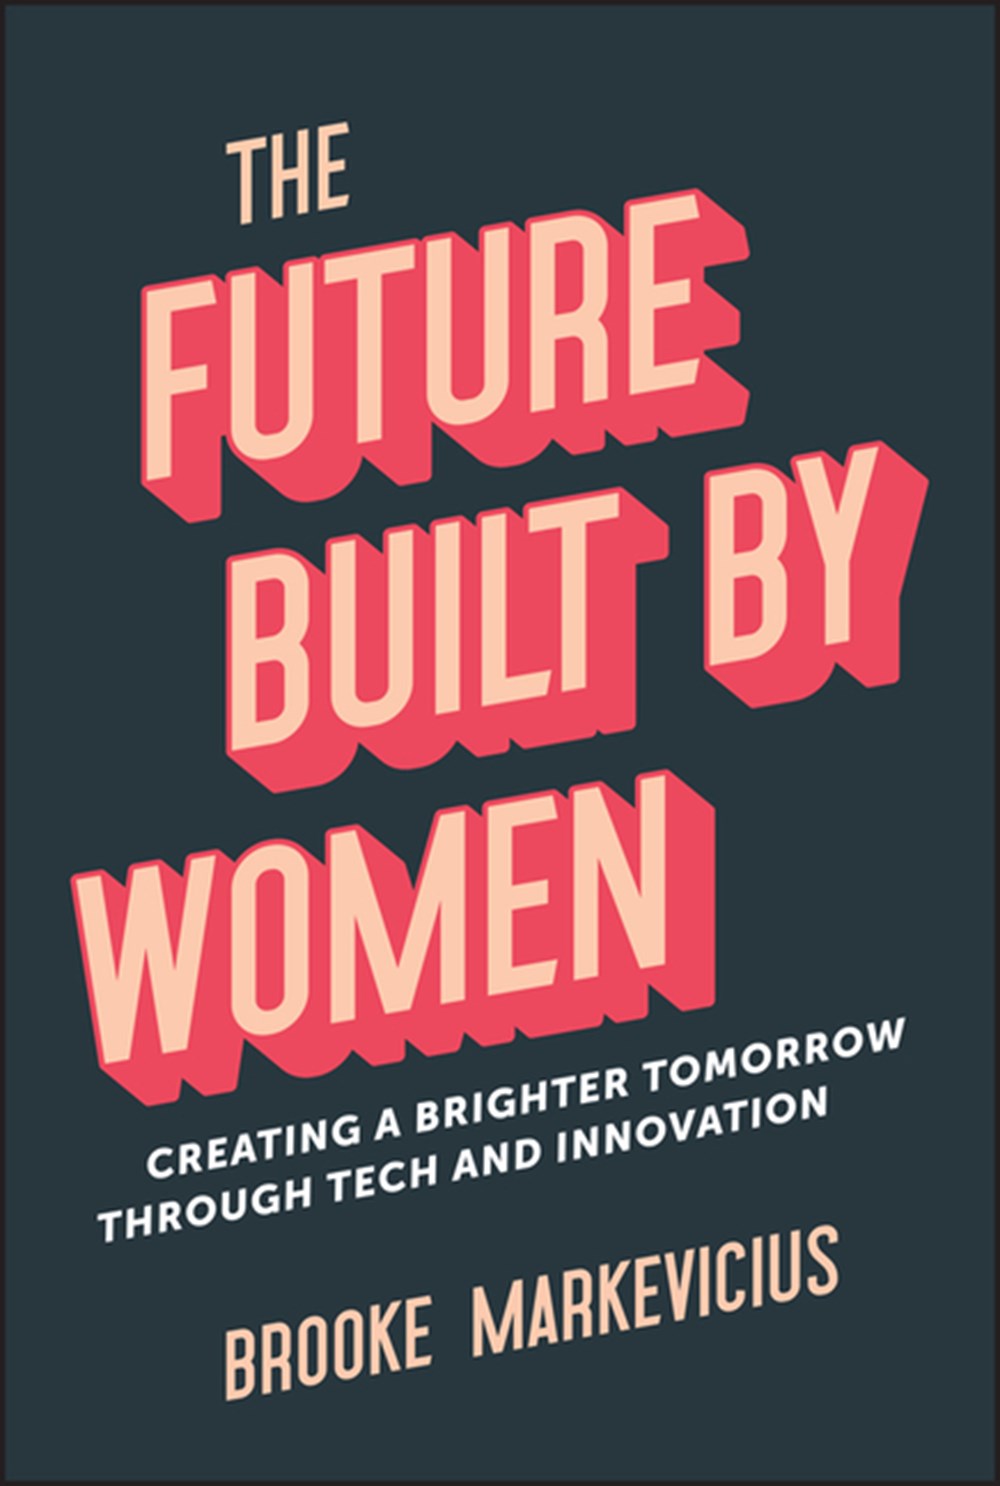 Future Built by Women: Creating a Brighter Tomorrow Through Tech and Innovation